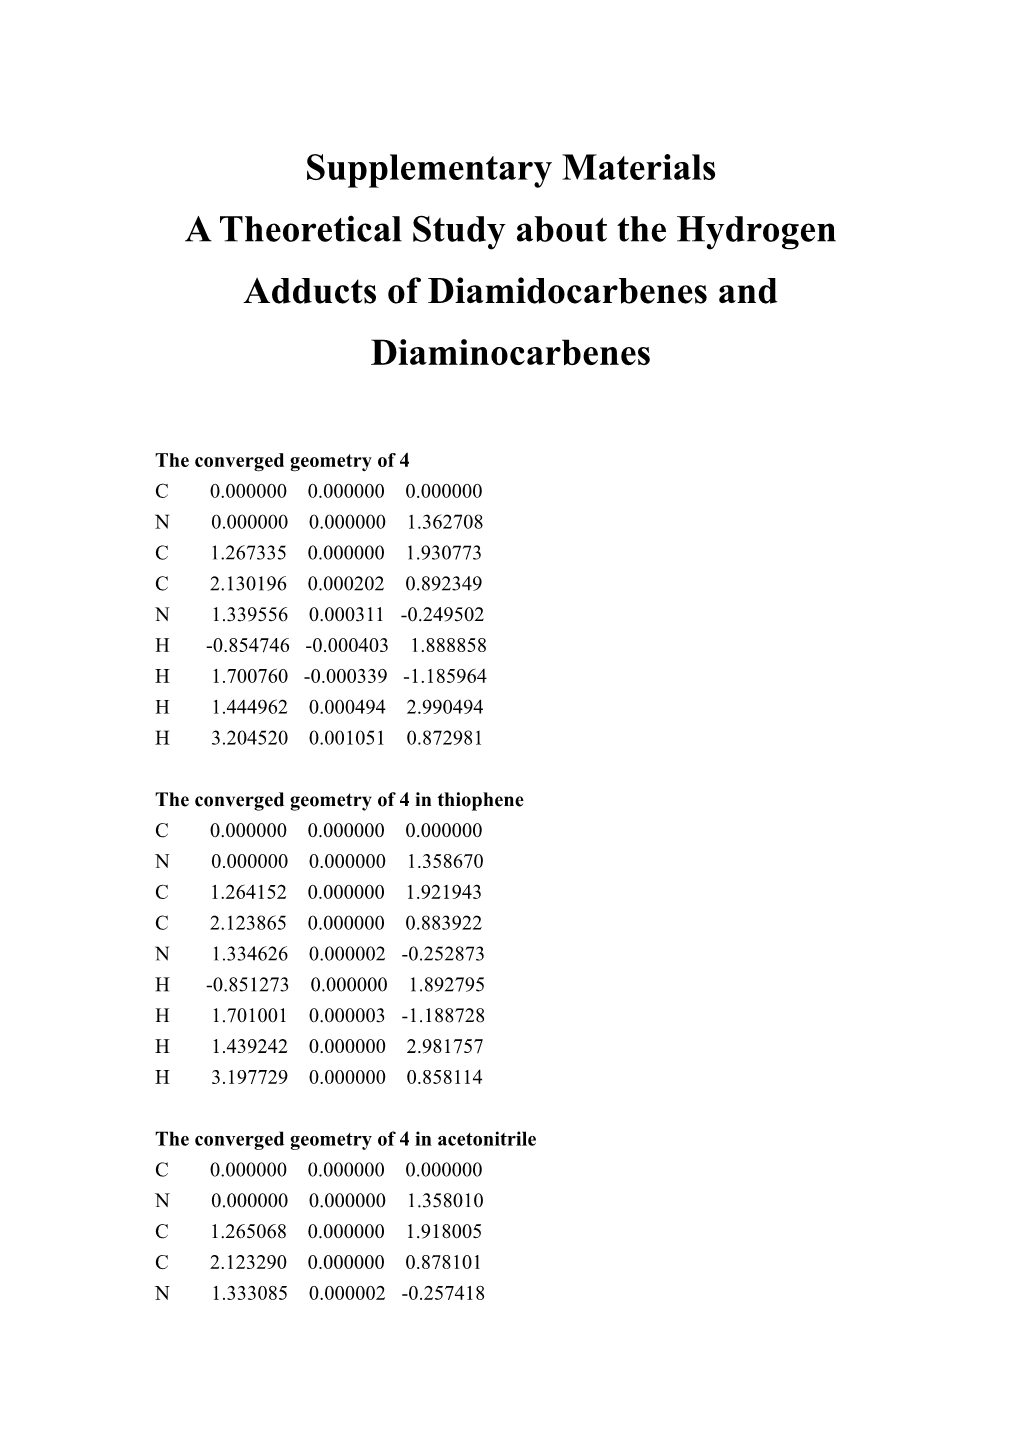 A Theoretical Study About the Hydrogen Adducts of Diamidocarbenes and Diaminocarbenes